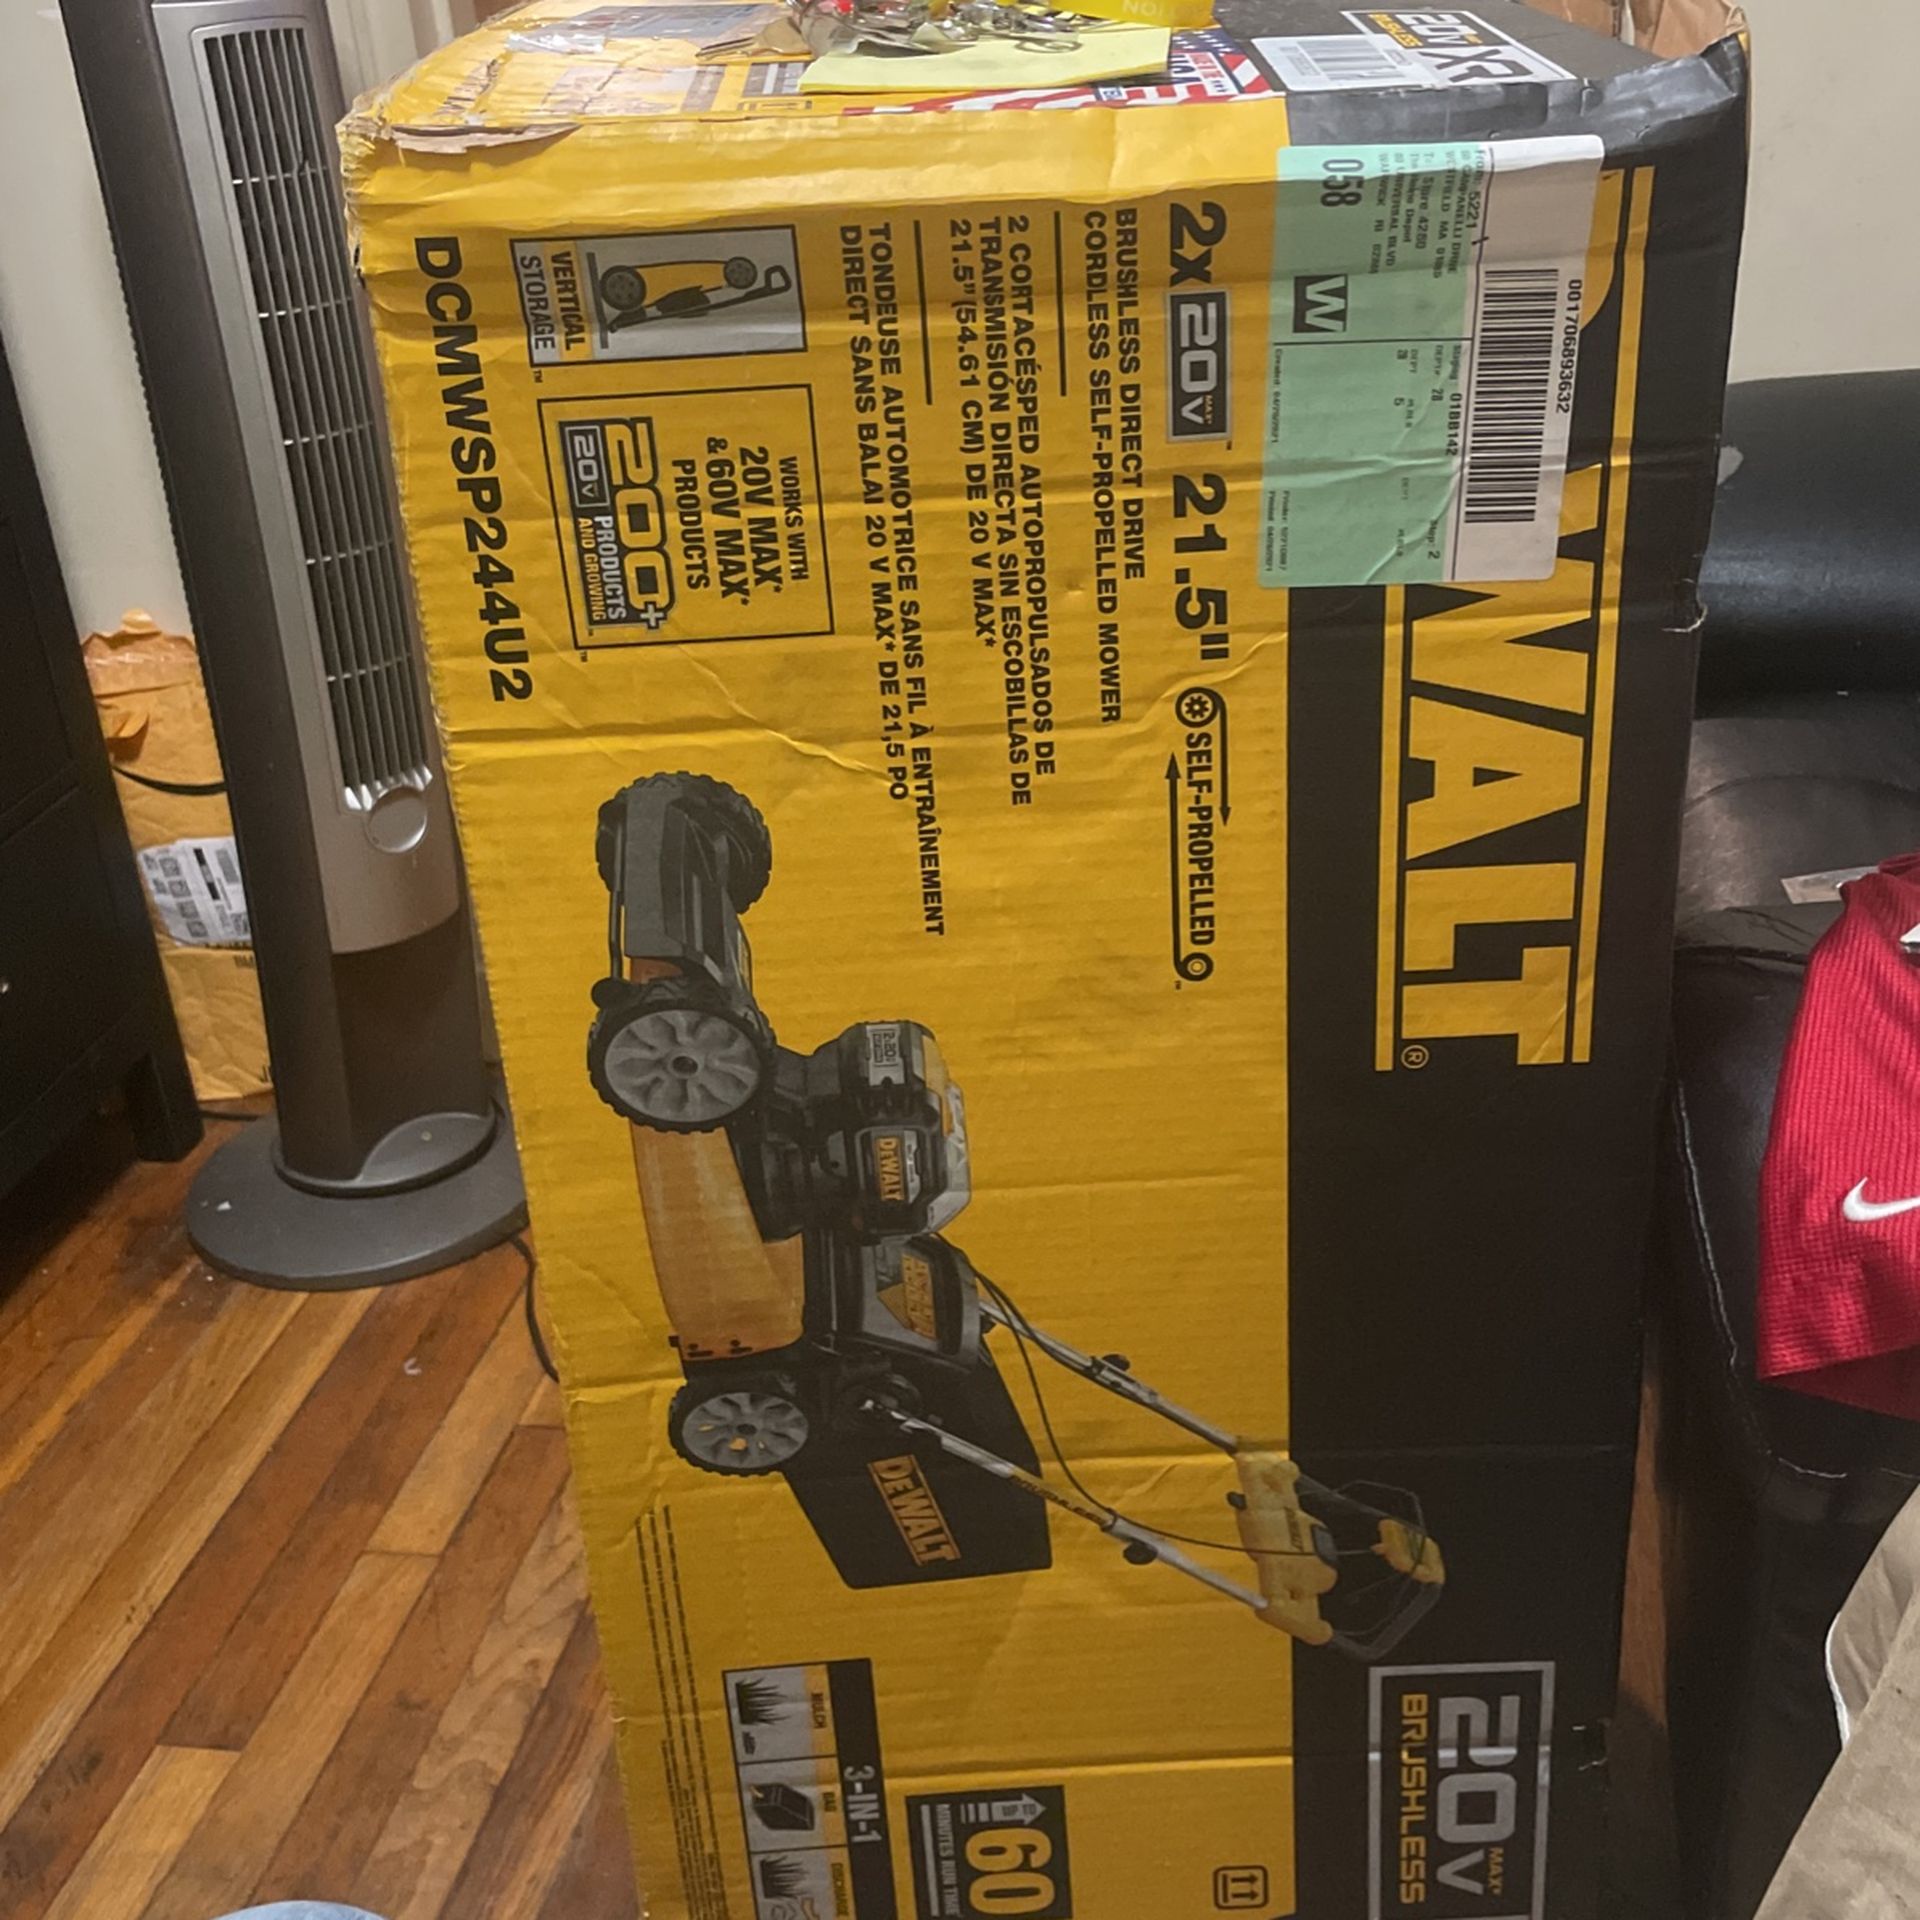 A Dewalt 20 V brushless lawnmower brand new in the box self-propelled battery powered￼